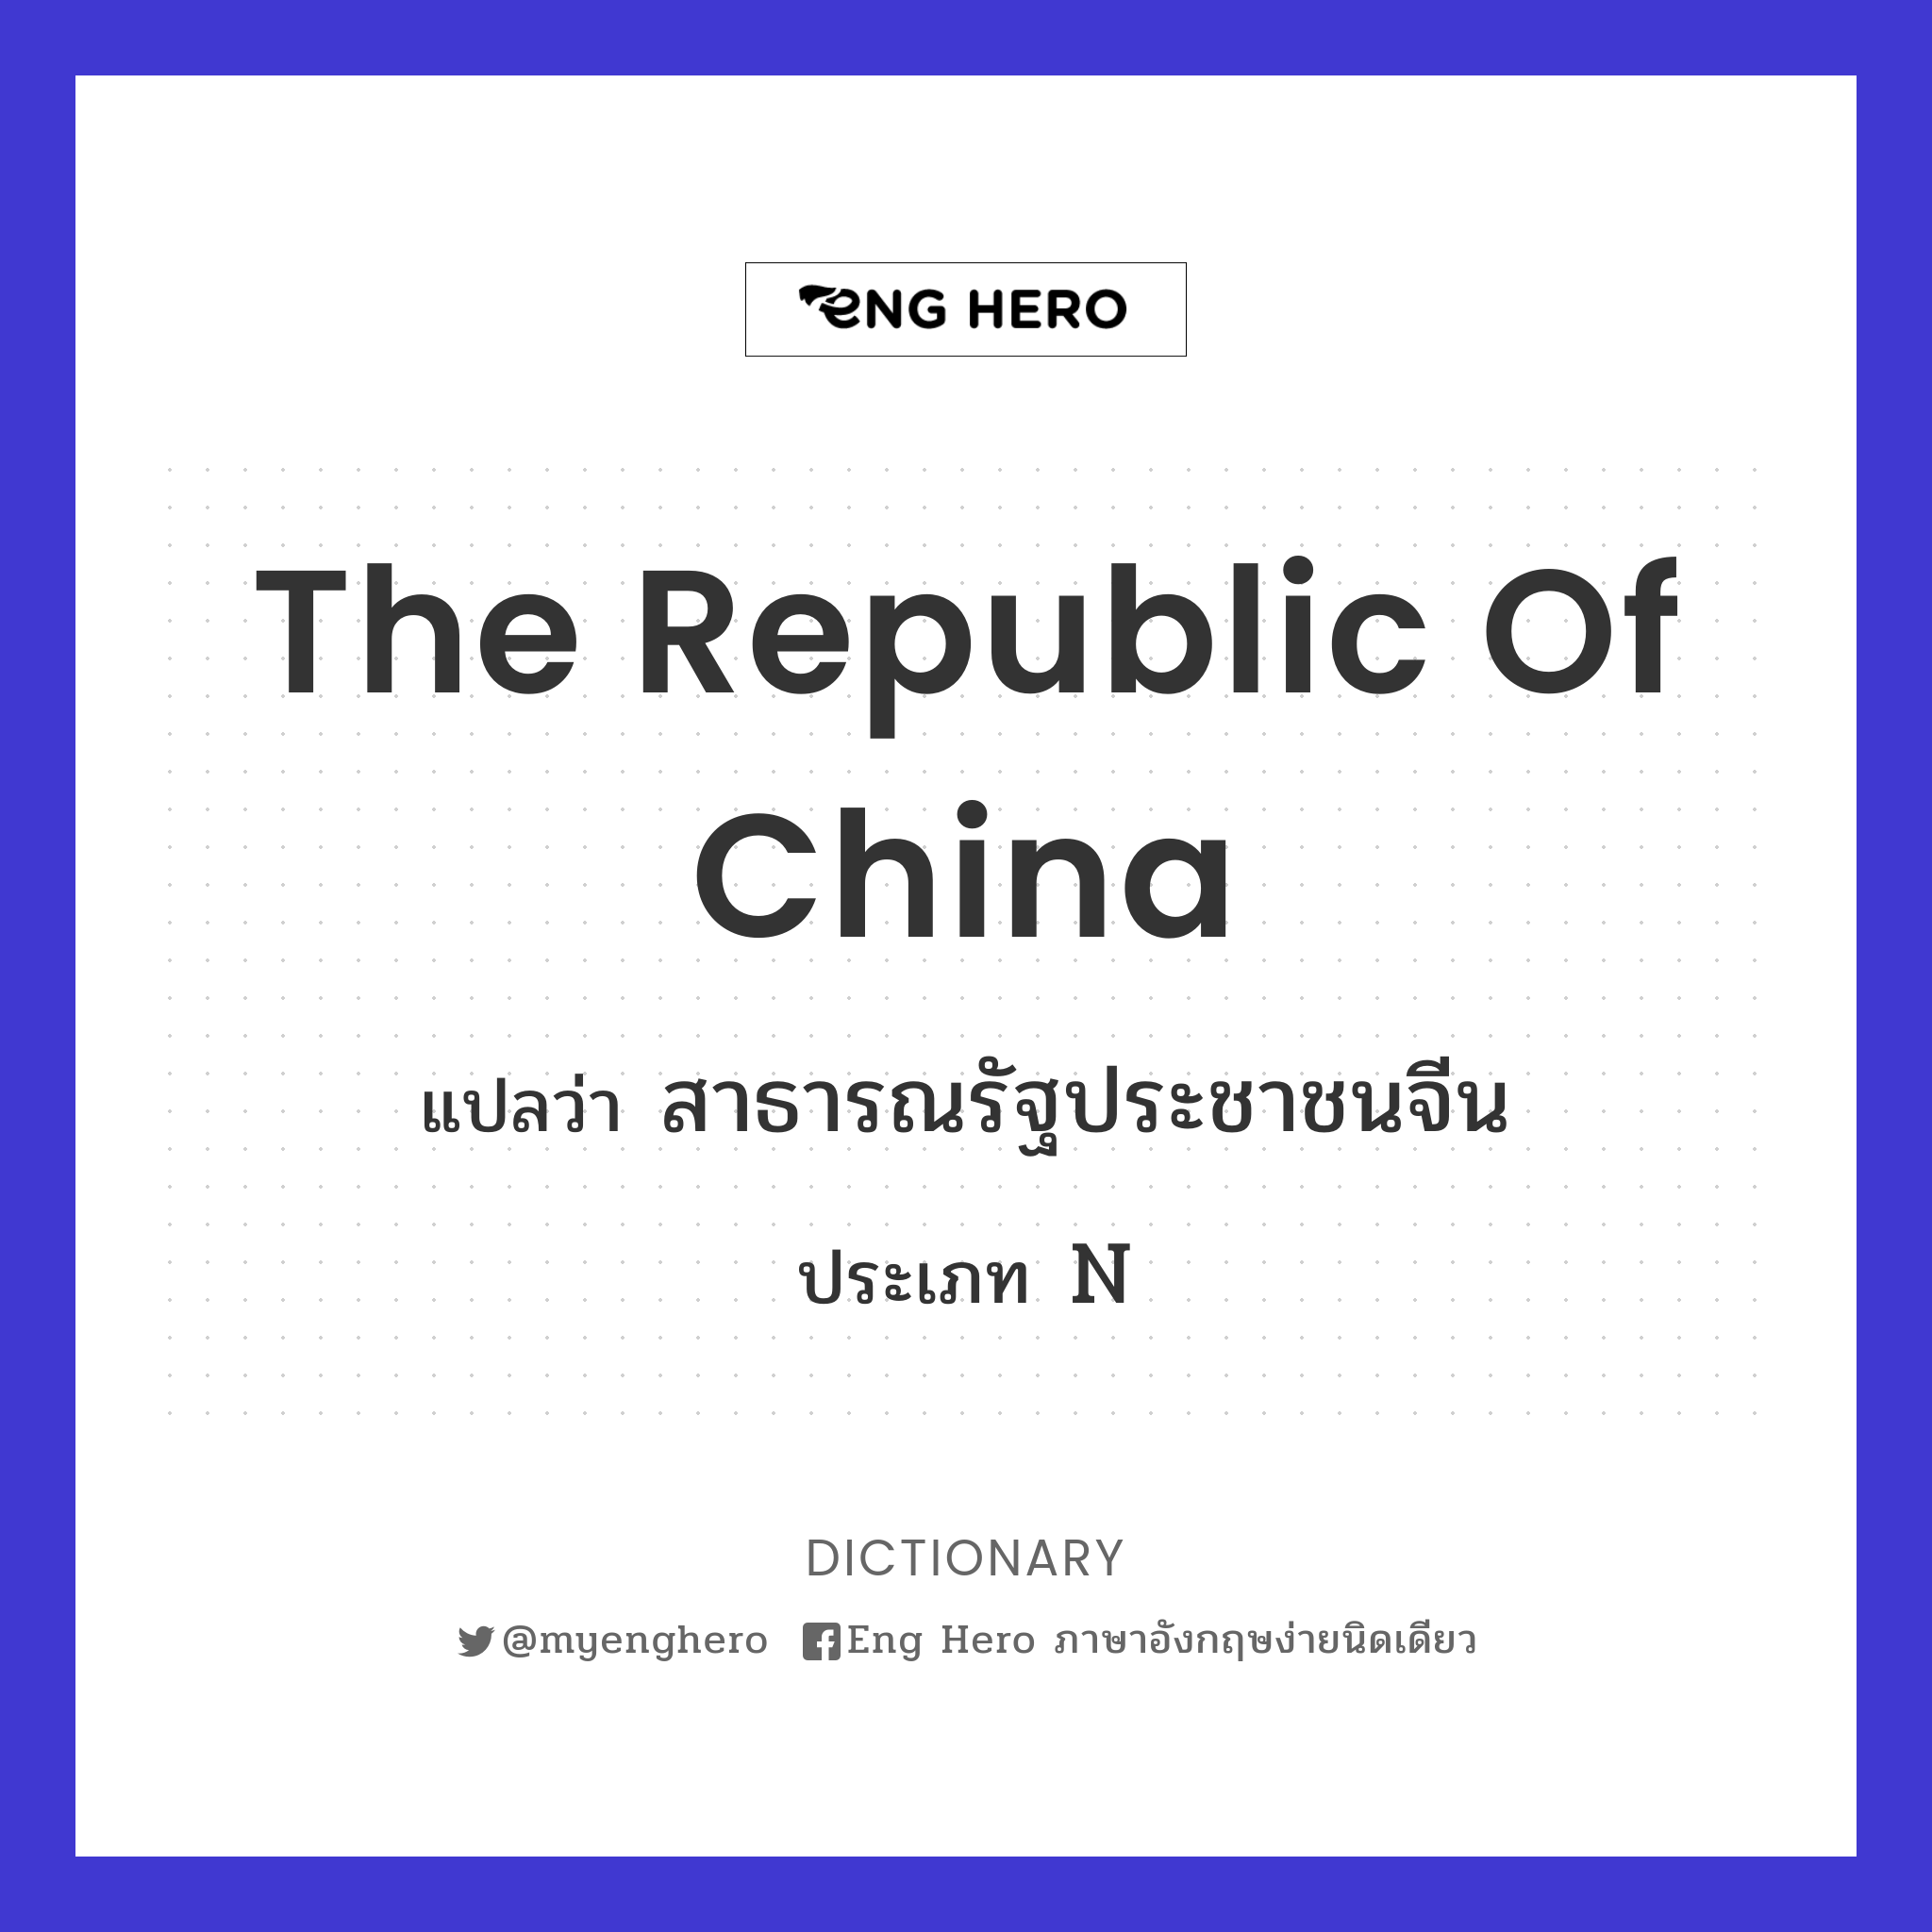 The Republic of China